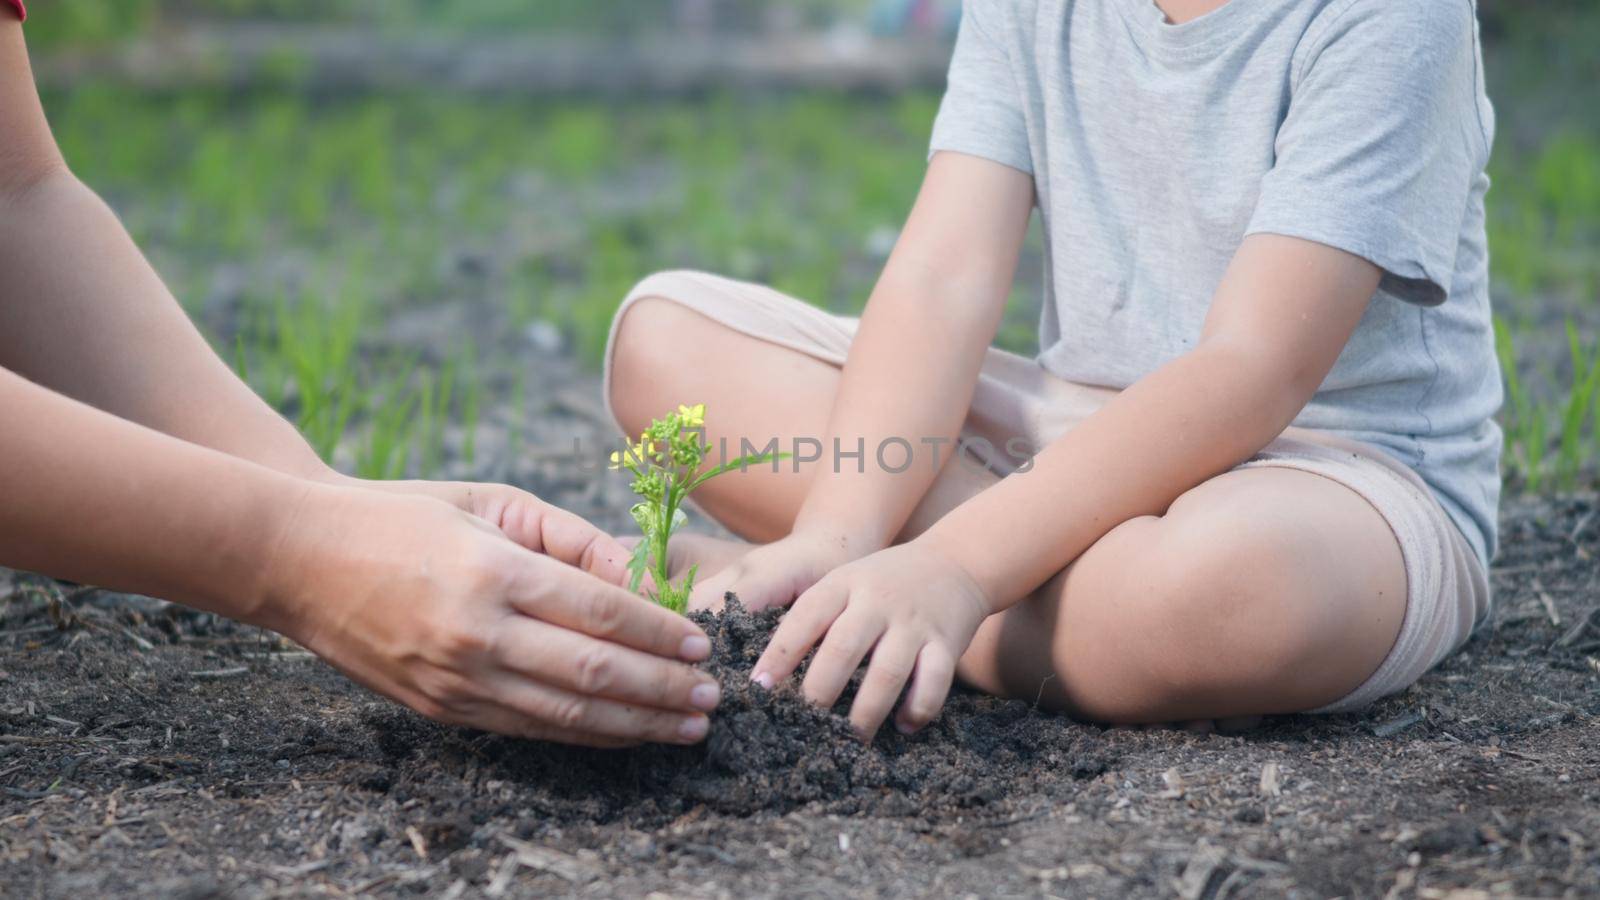 kid hand and parent planting growing a tree in soil on the garden together by Sorapop